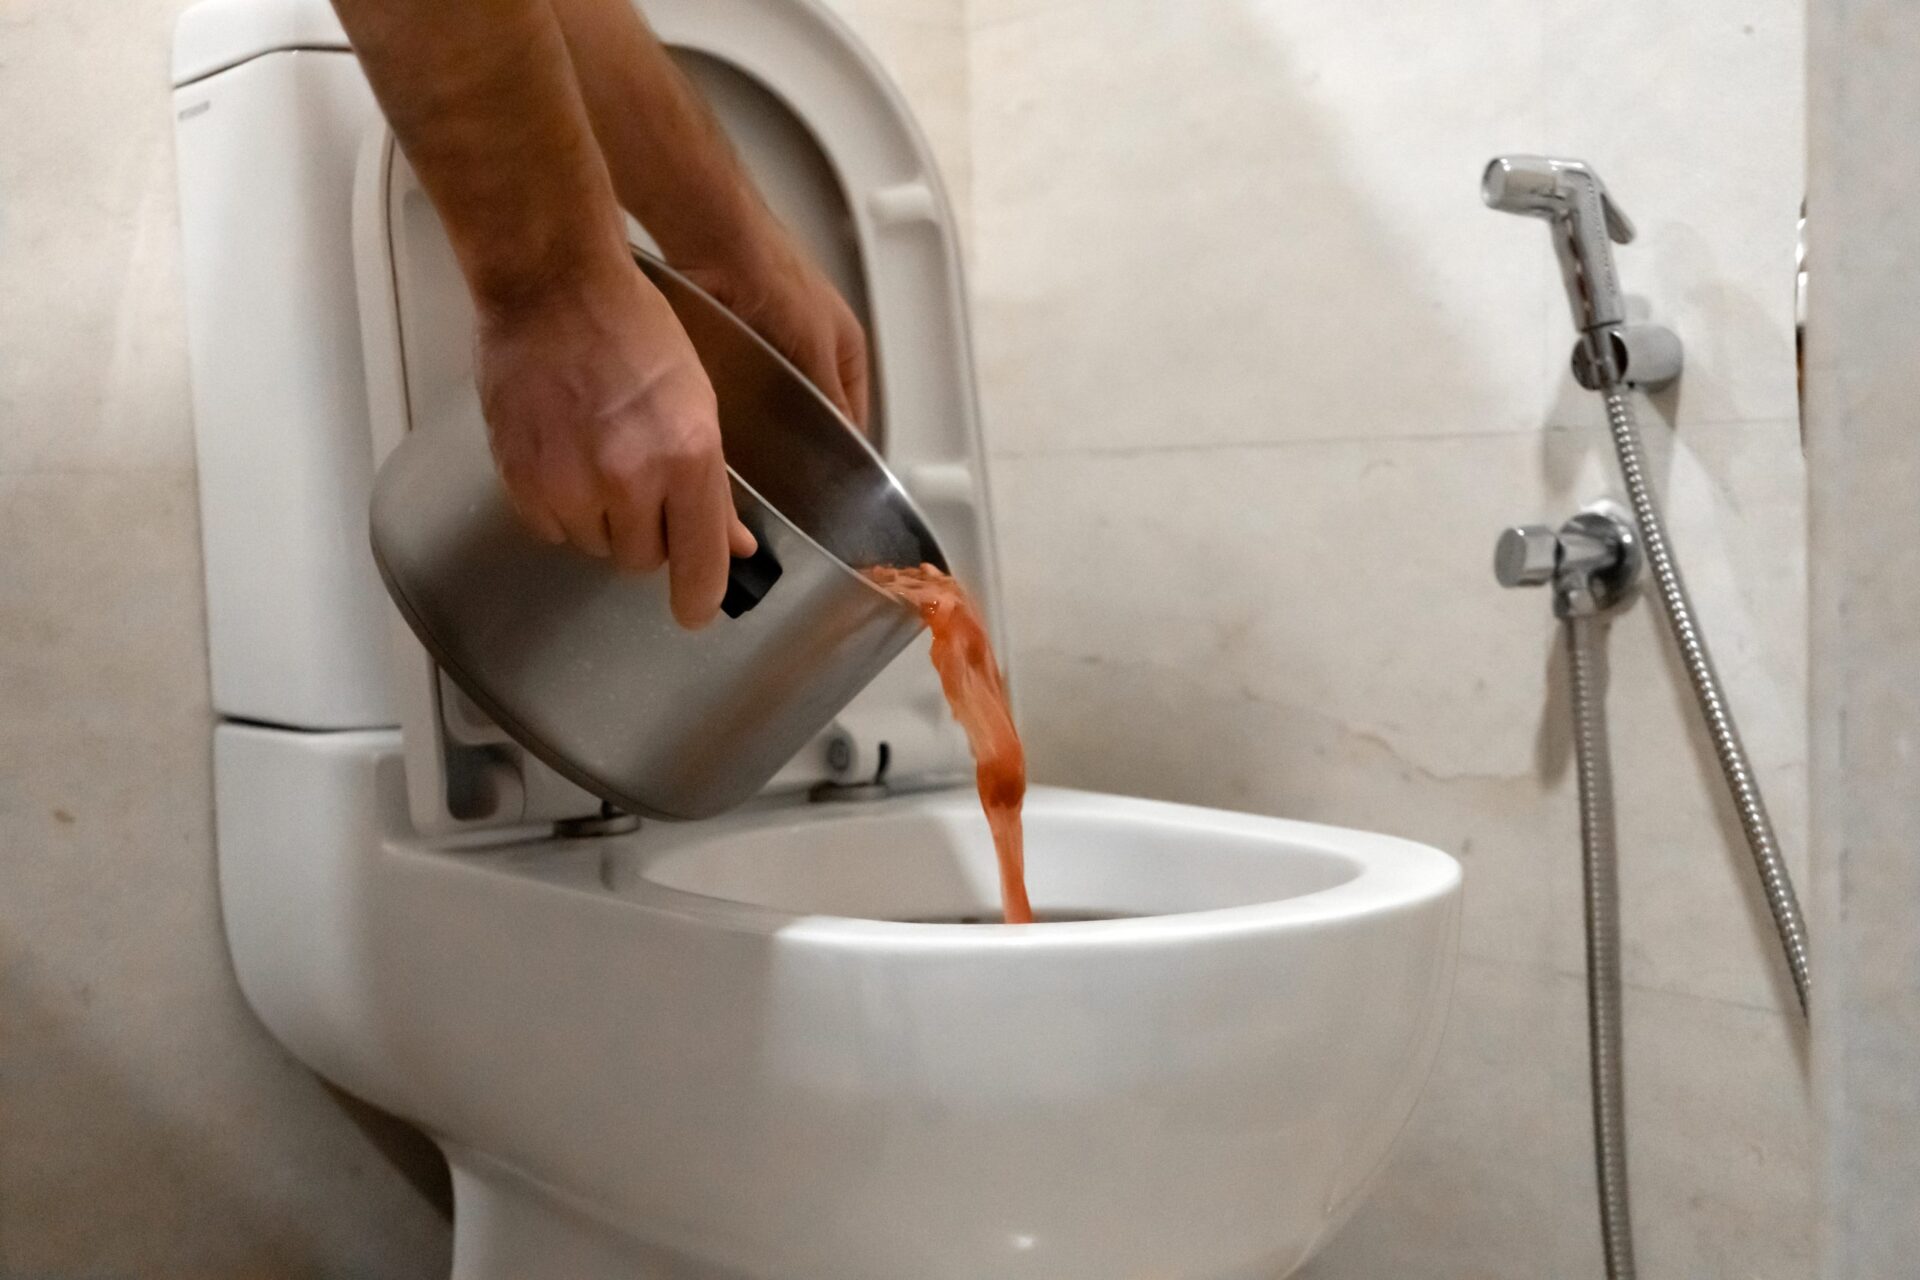 Person pouring food from a pot in the toilet causing a clogged toilet. MidCity Plumbers